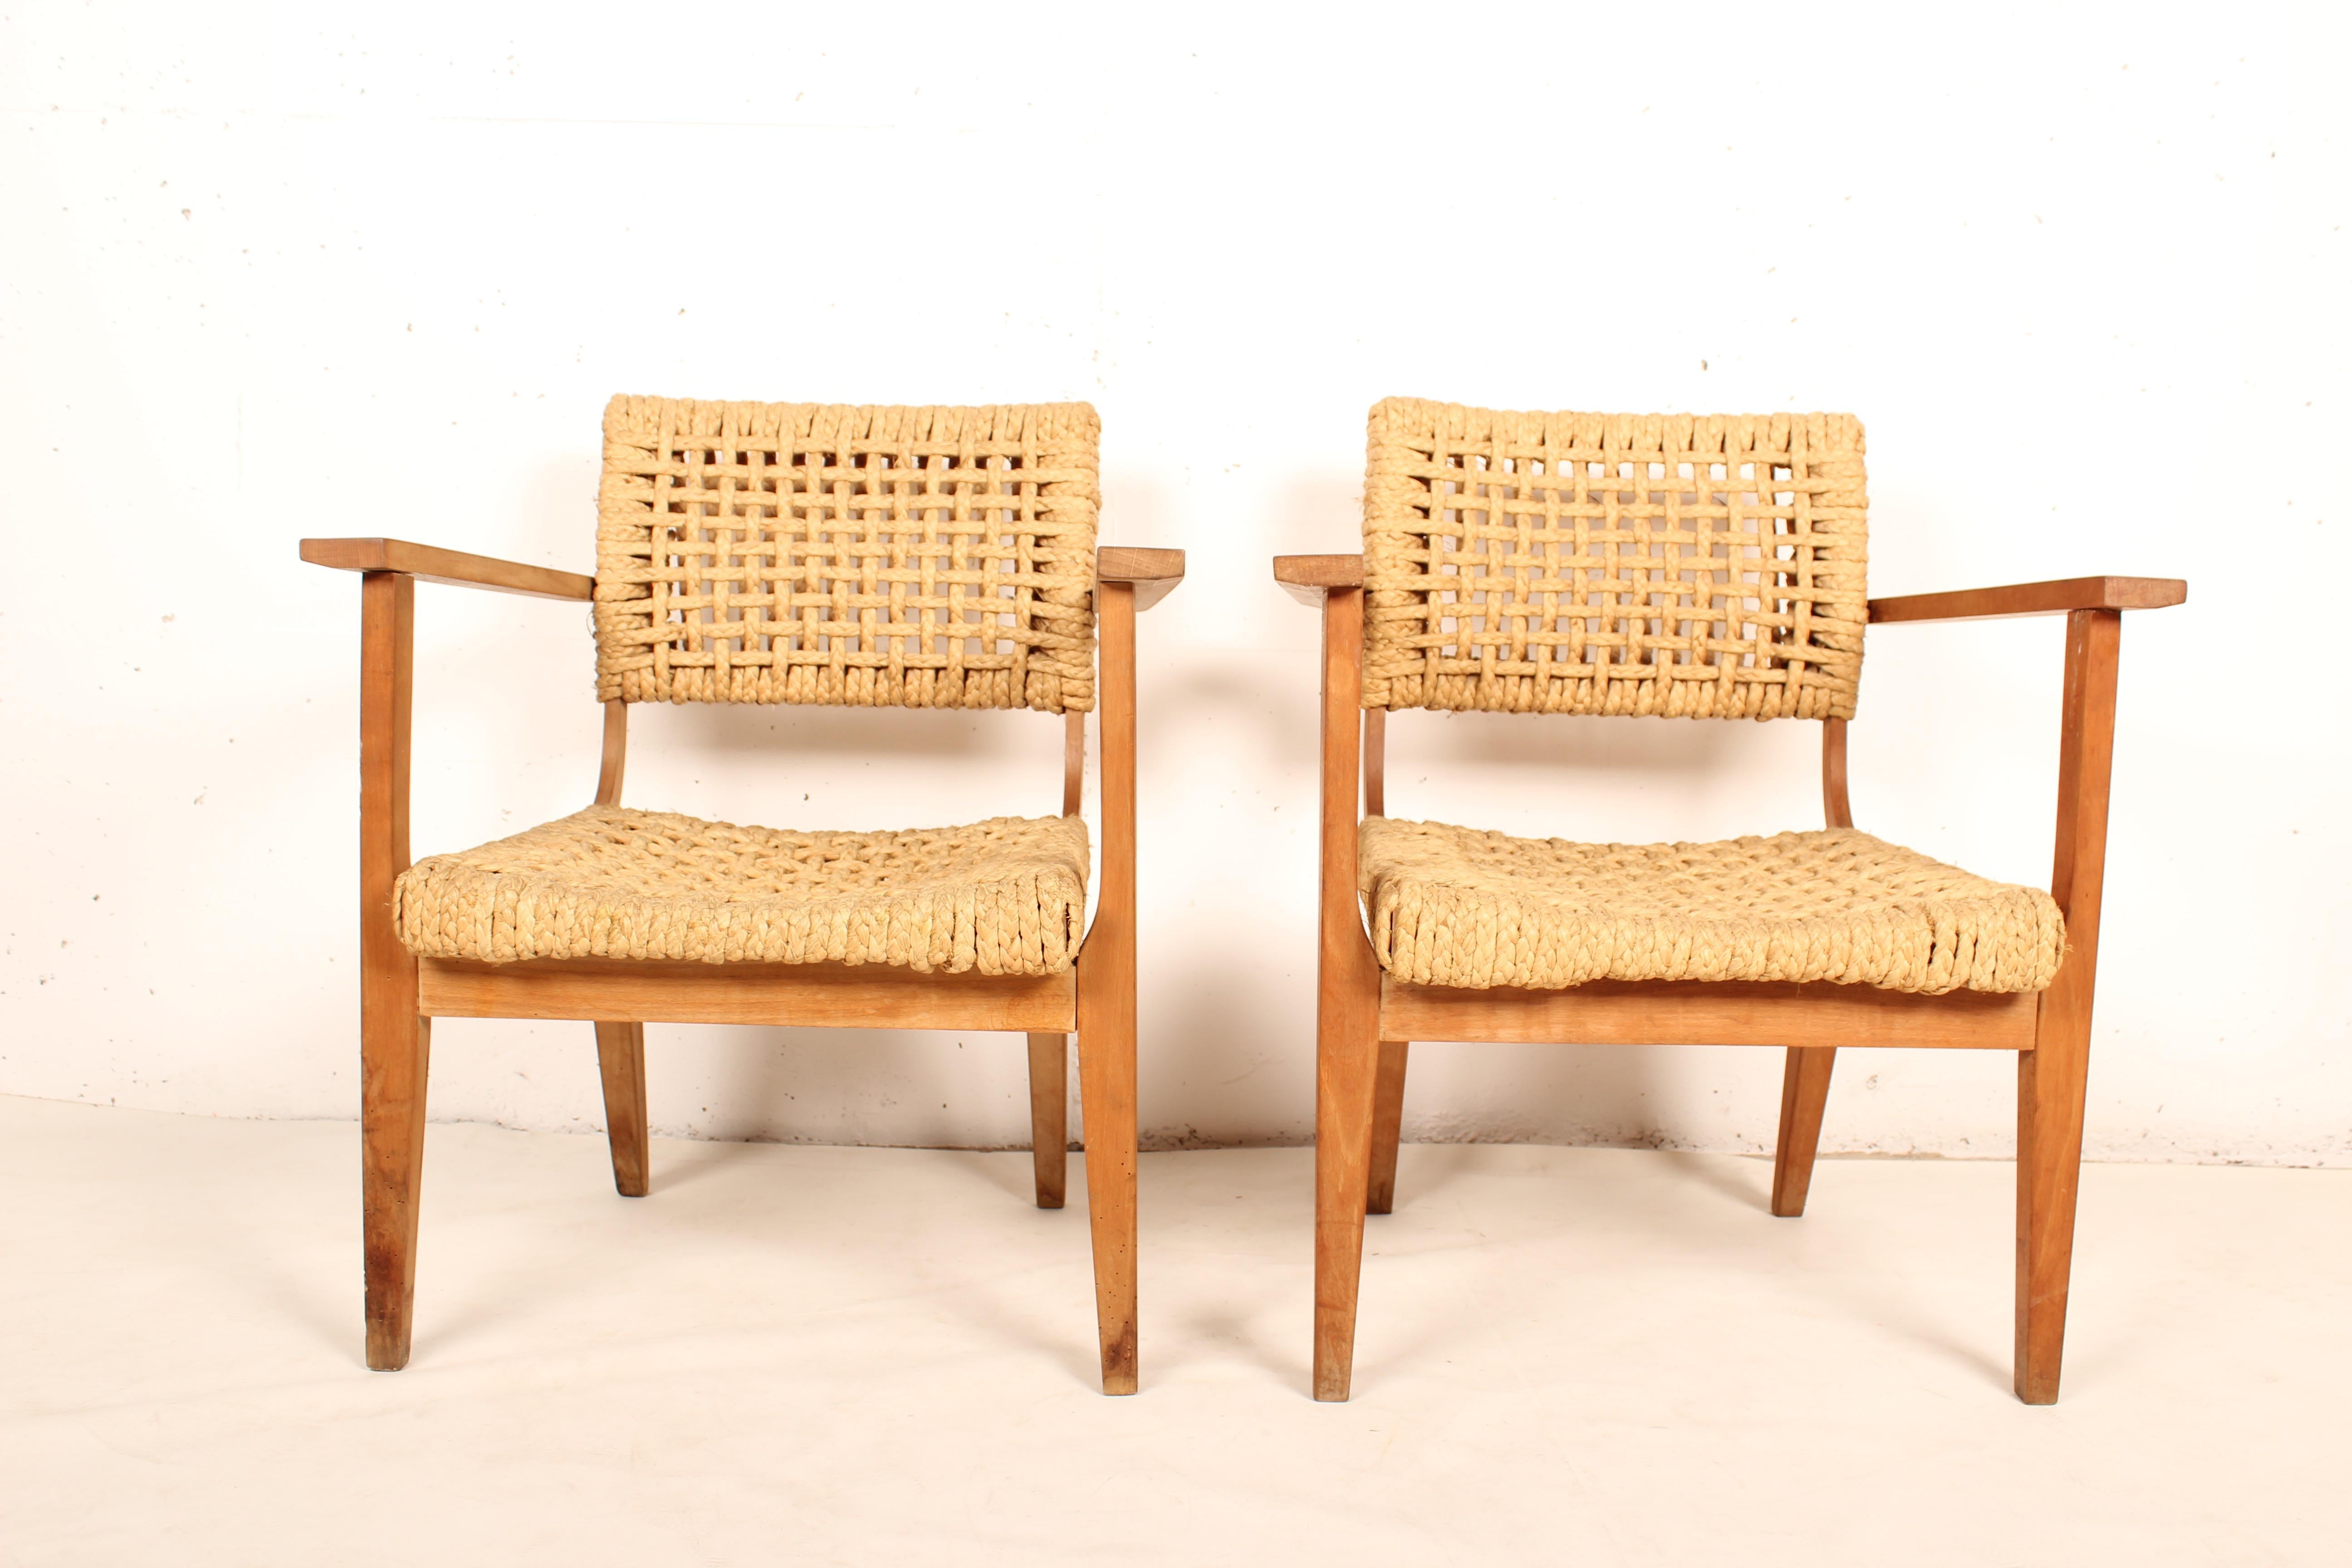 Robust French armchair from the beginning of the 50's. The seat and the back are made of woven hemp from the abaca plant. This natural style is typical for the French design of Audoux-Minet established in Marseille.
 